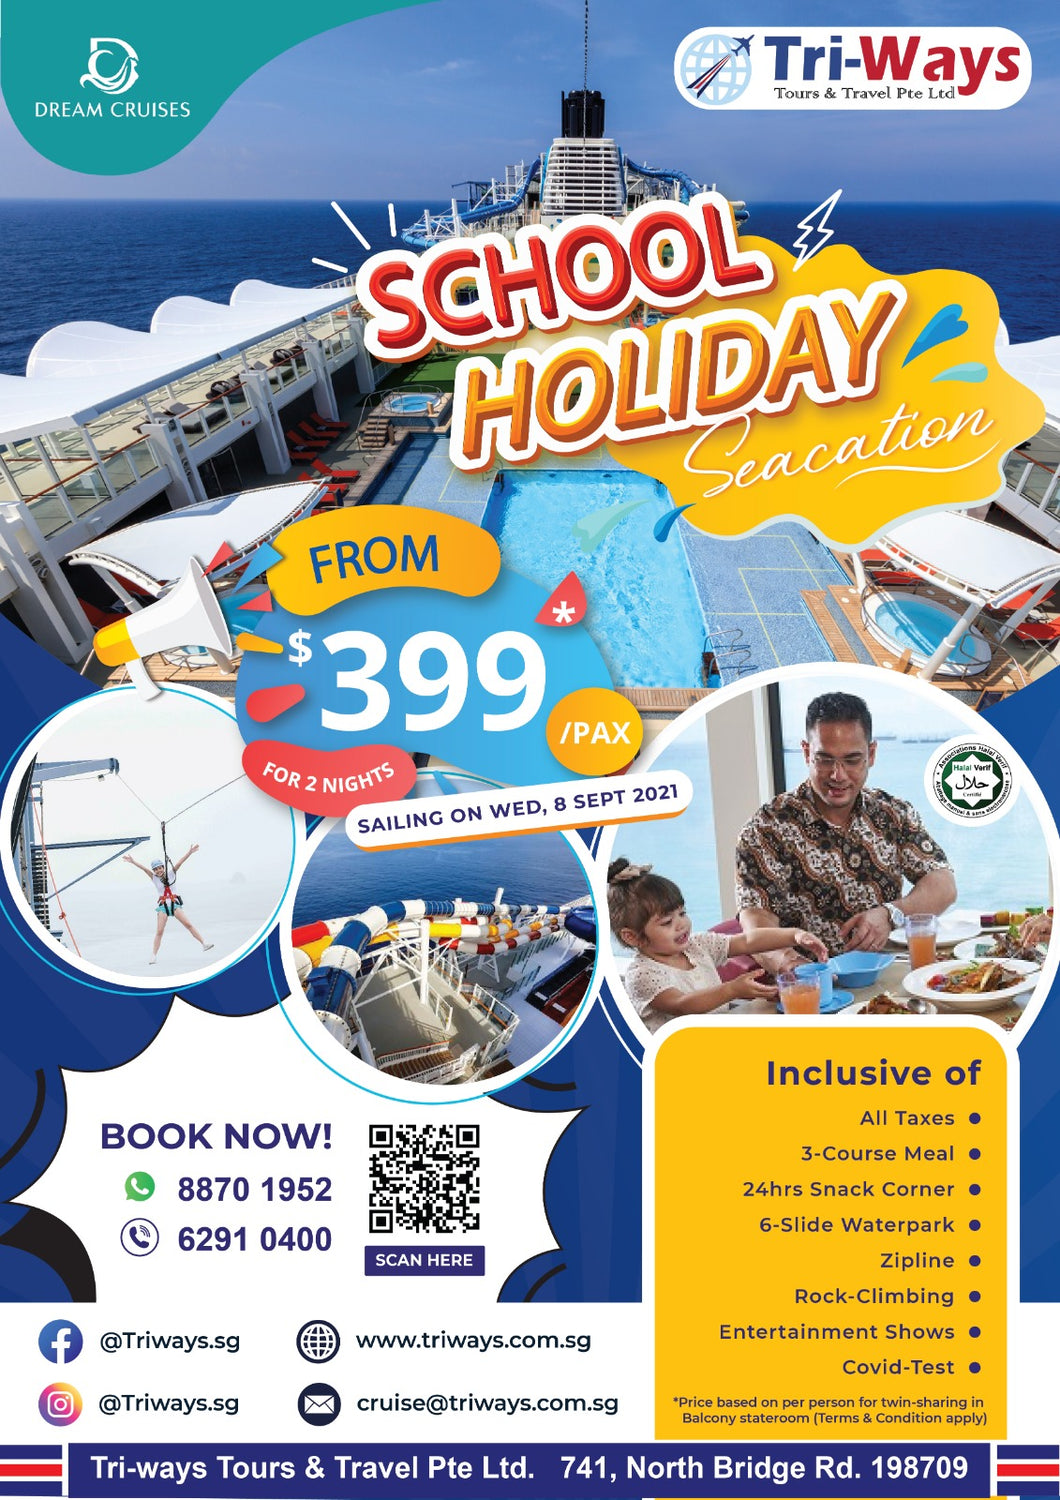 [ 8 - 10 Sept.2021 ] SEPTEMBER School Holiday Seacation with Free Upgrade to Balcony Stateroom